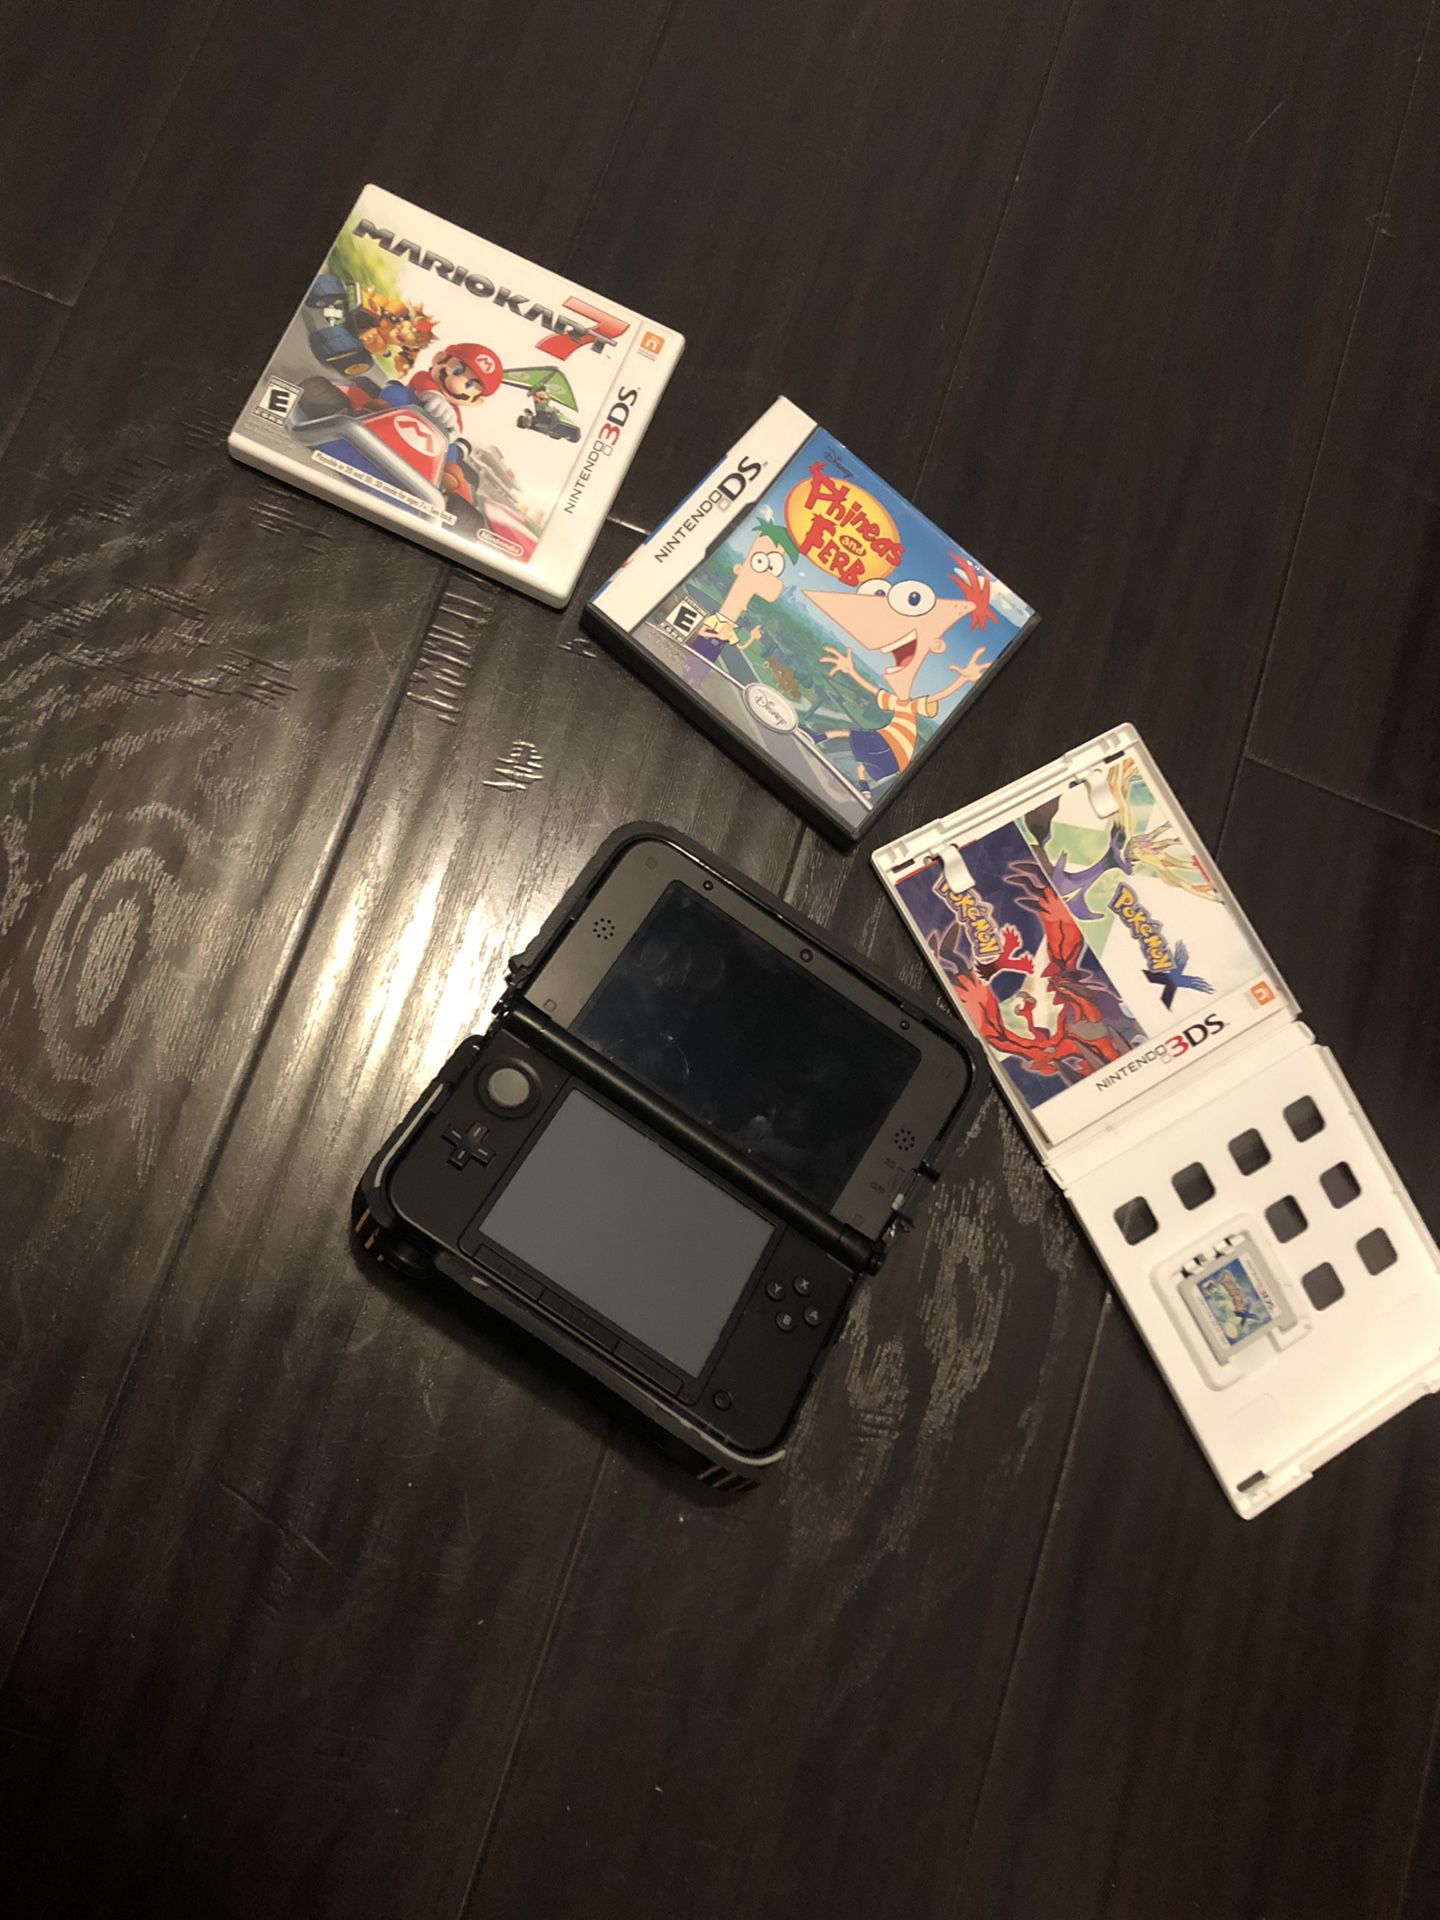 Nintendo 3DS with nerf case and games.